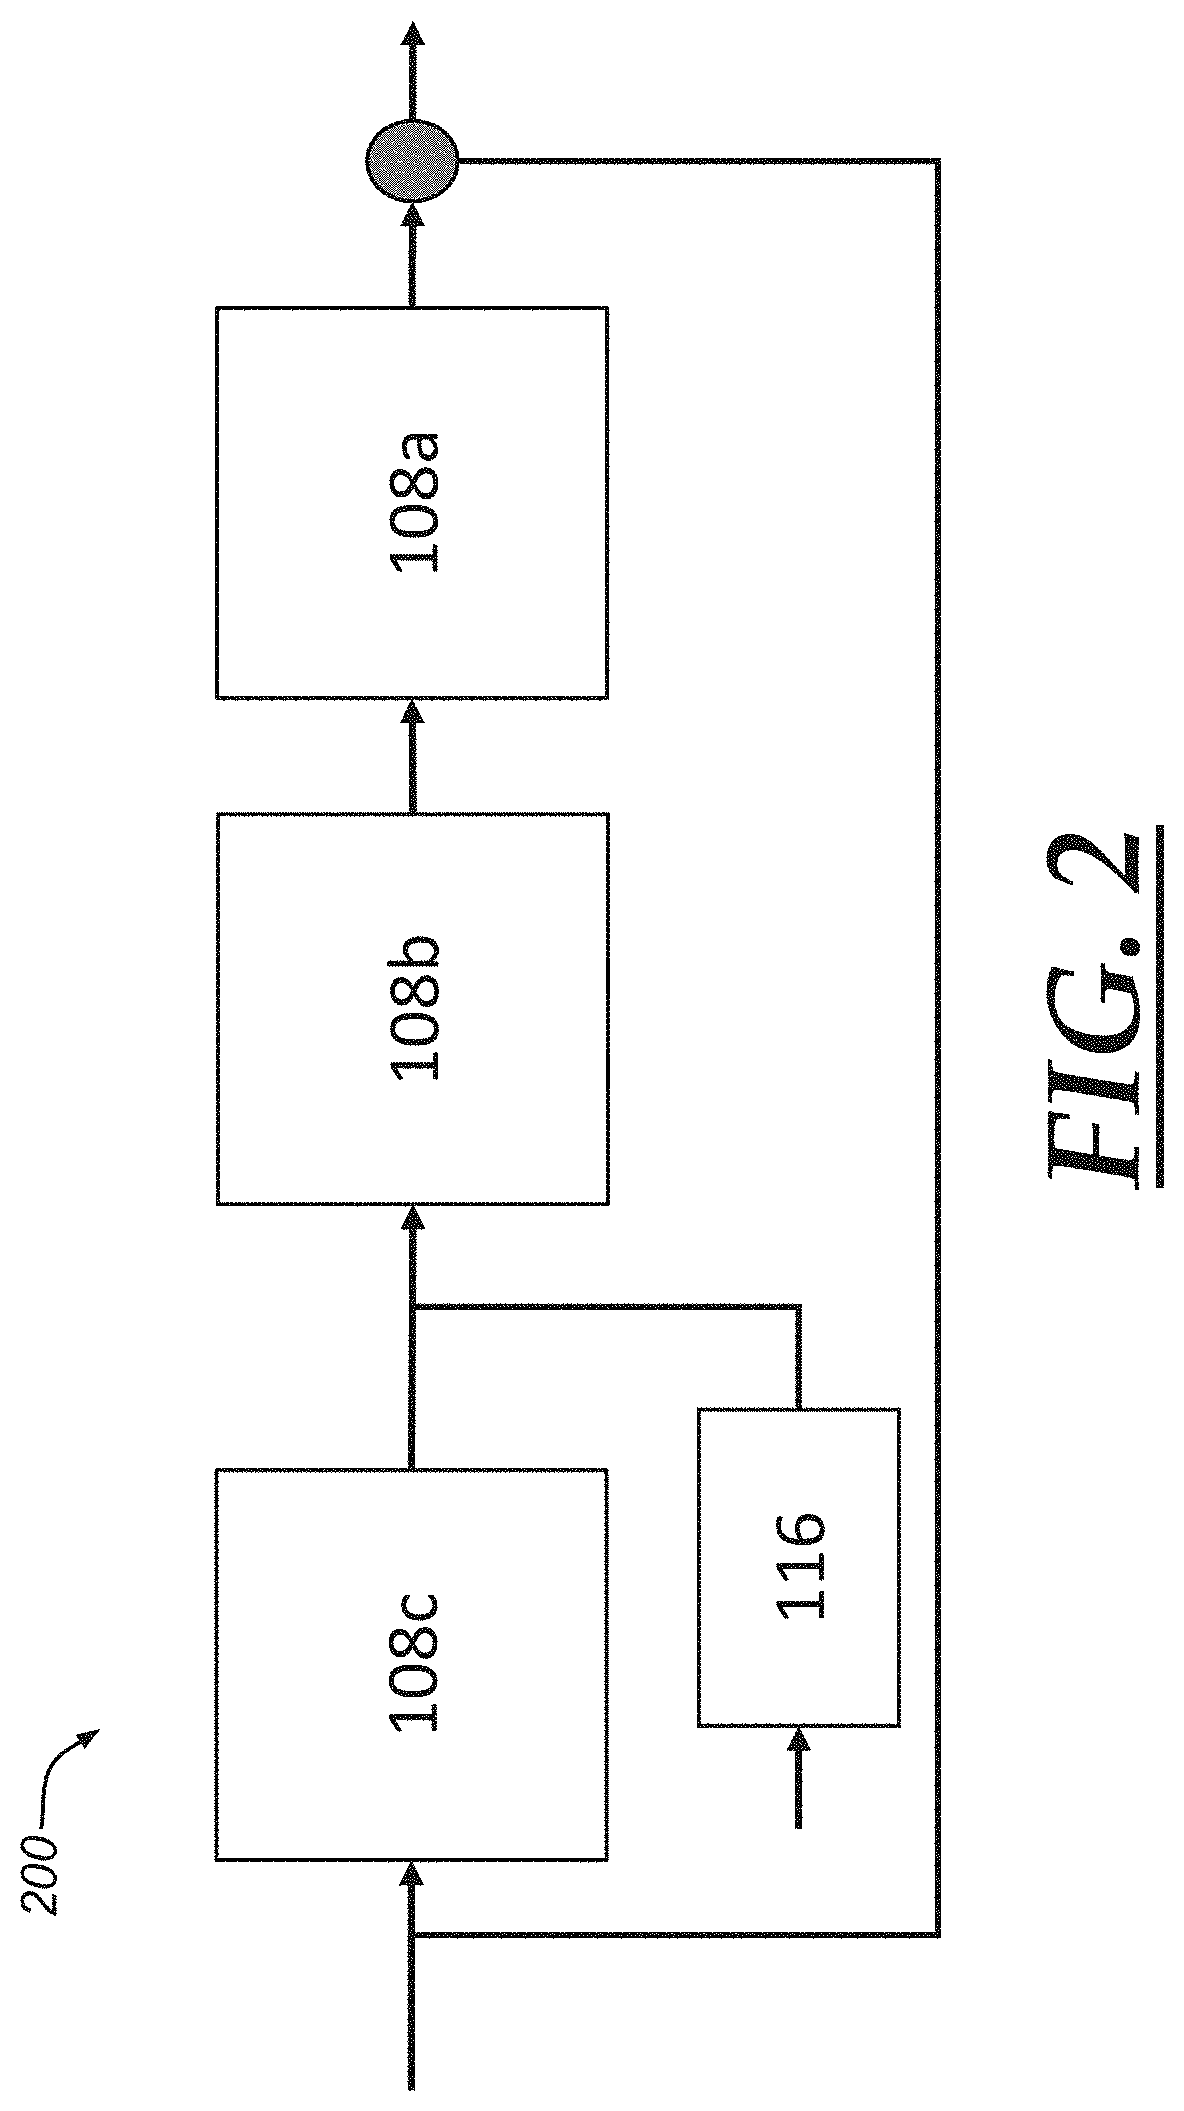 NOX formation prediction for improved catalytic converter control